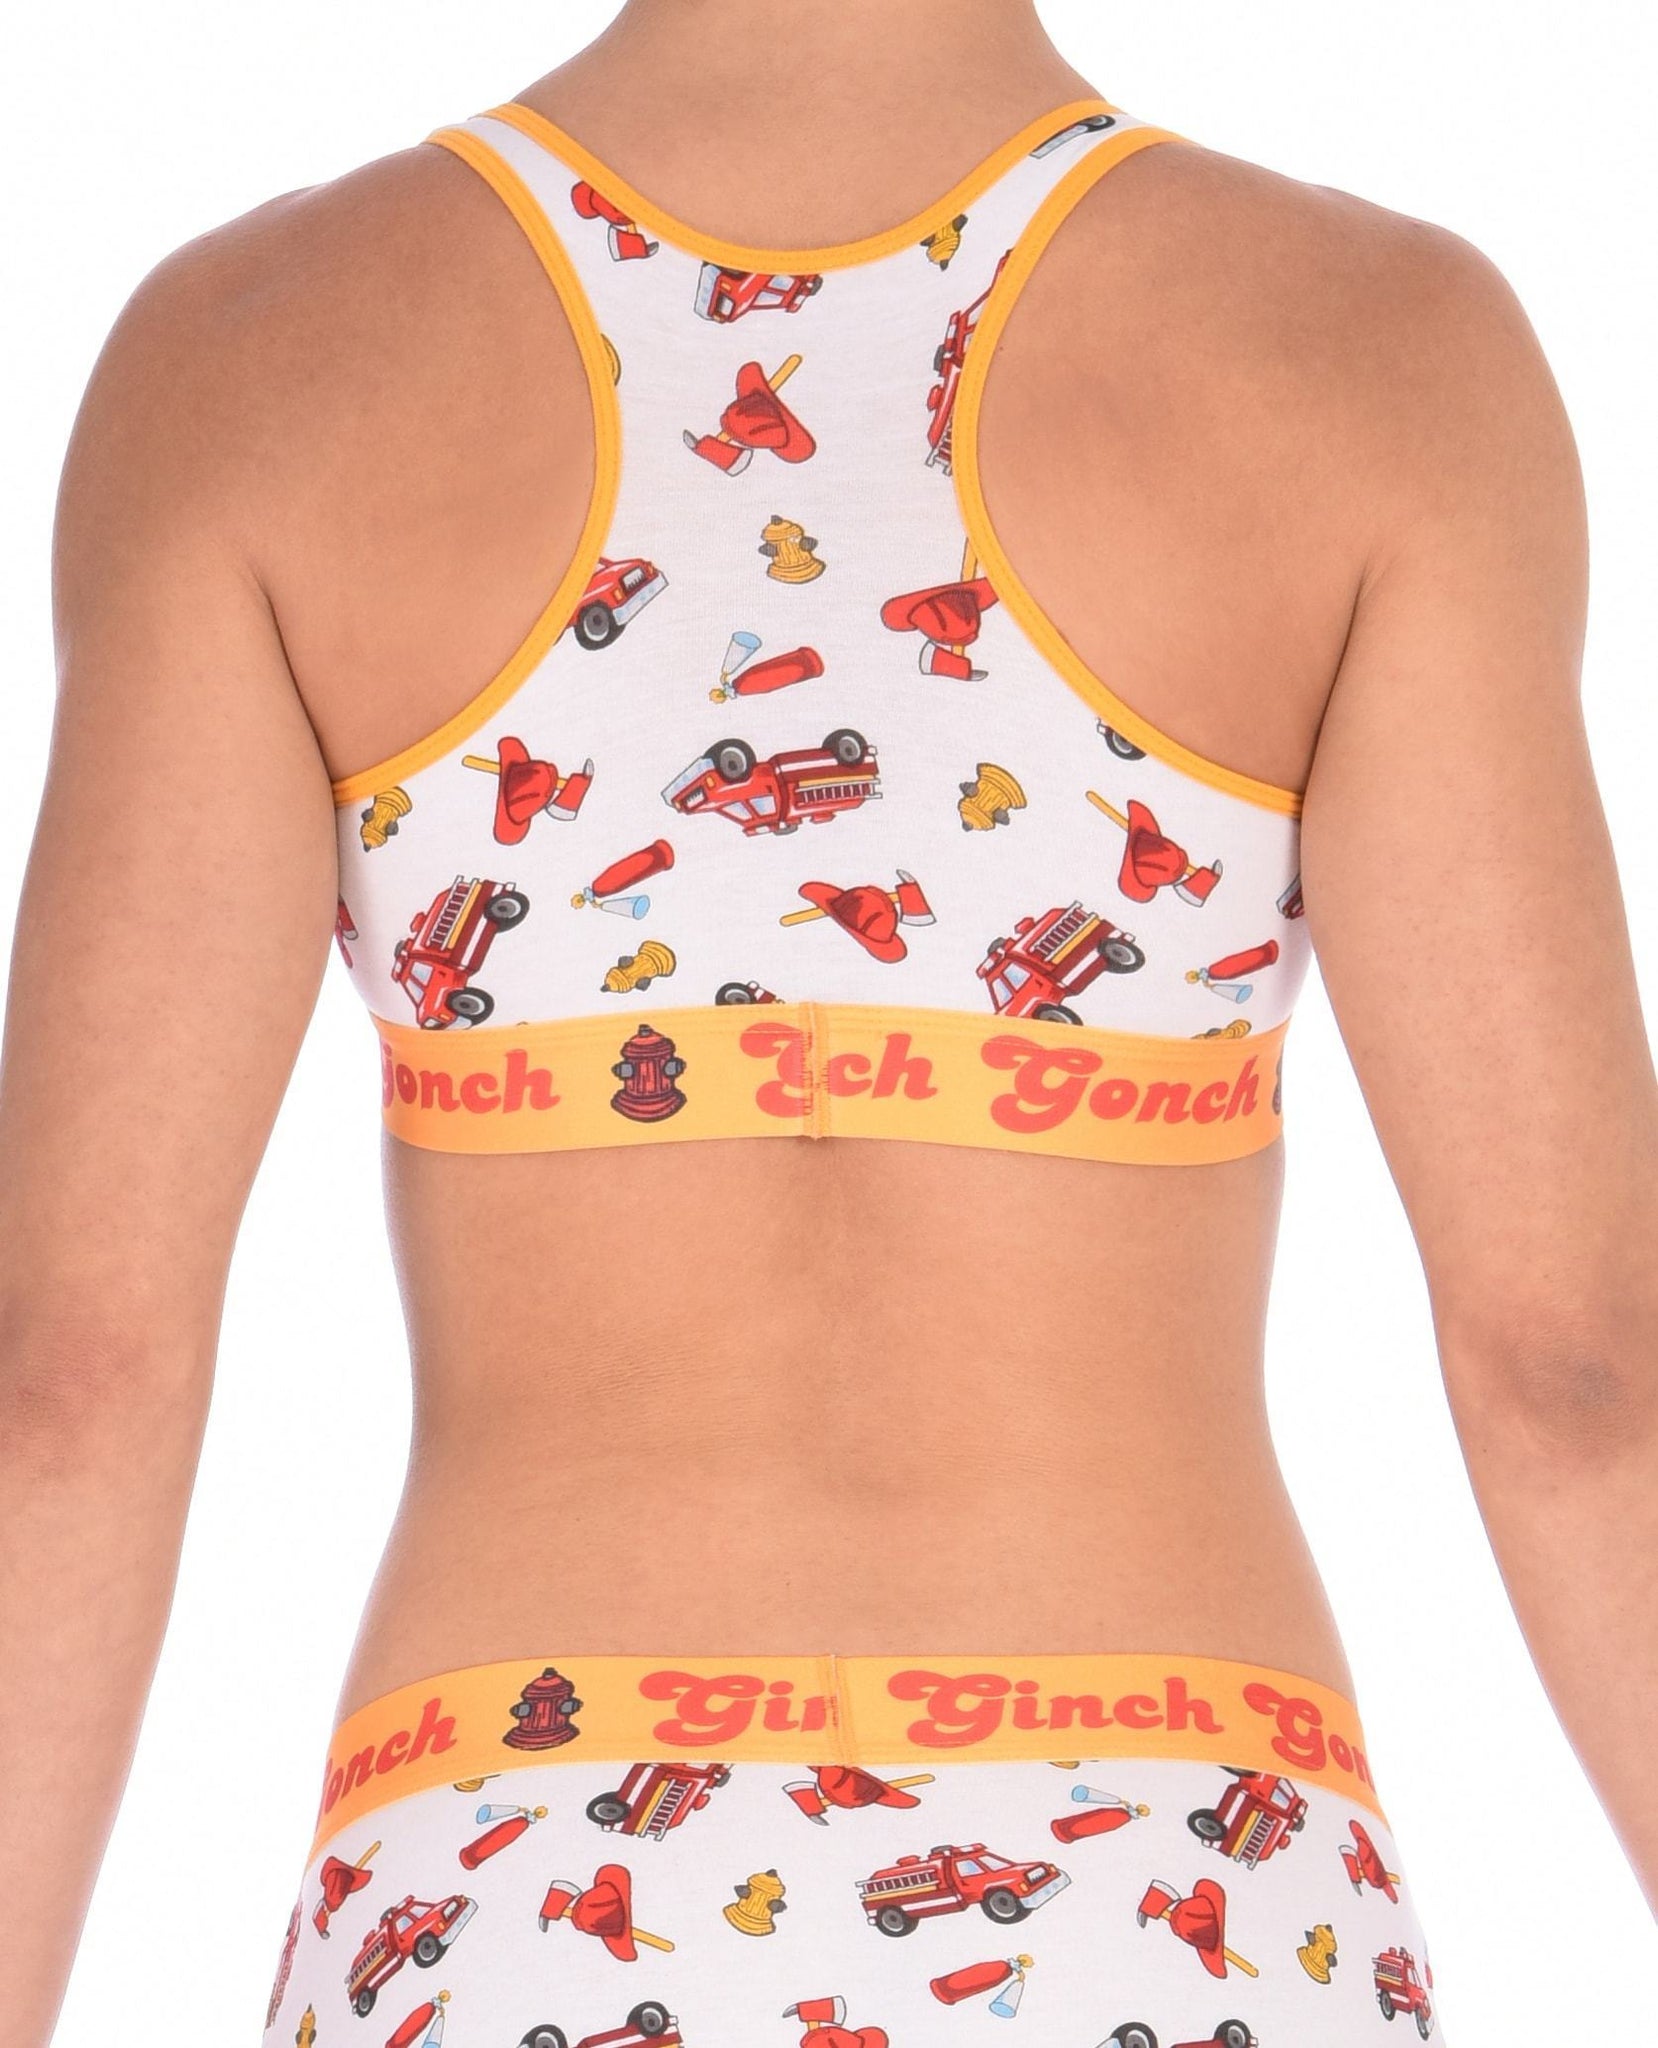 Ginch Gonch GG Fire Fighters sports bra women's underwear y front white fabric with fire engines hats and hydrants, yellow trim and yellow printed band back shown with matching brief